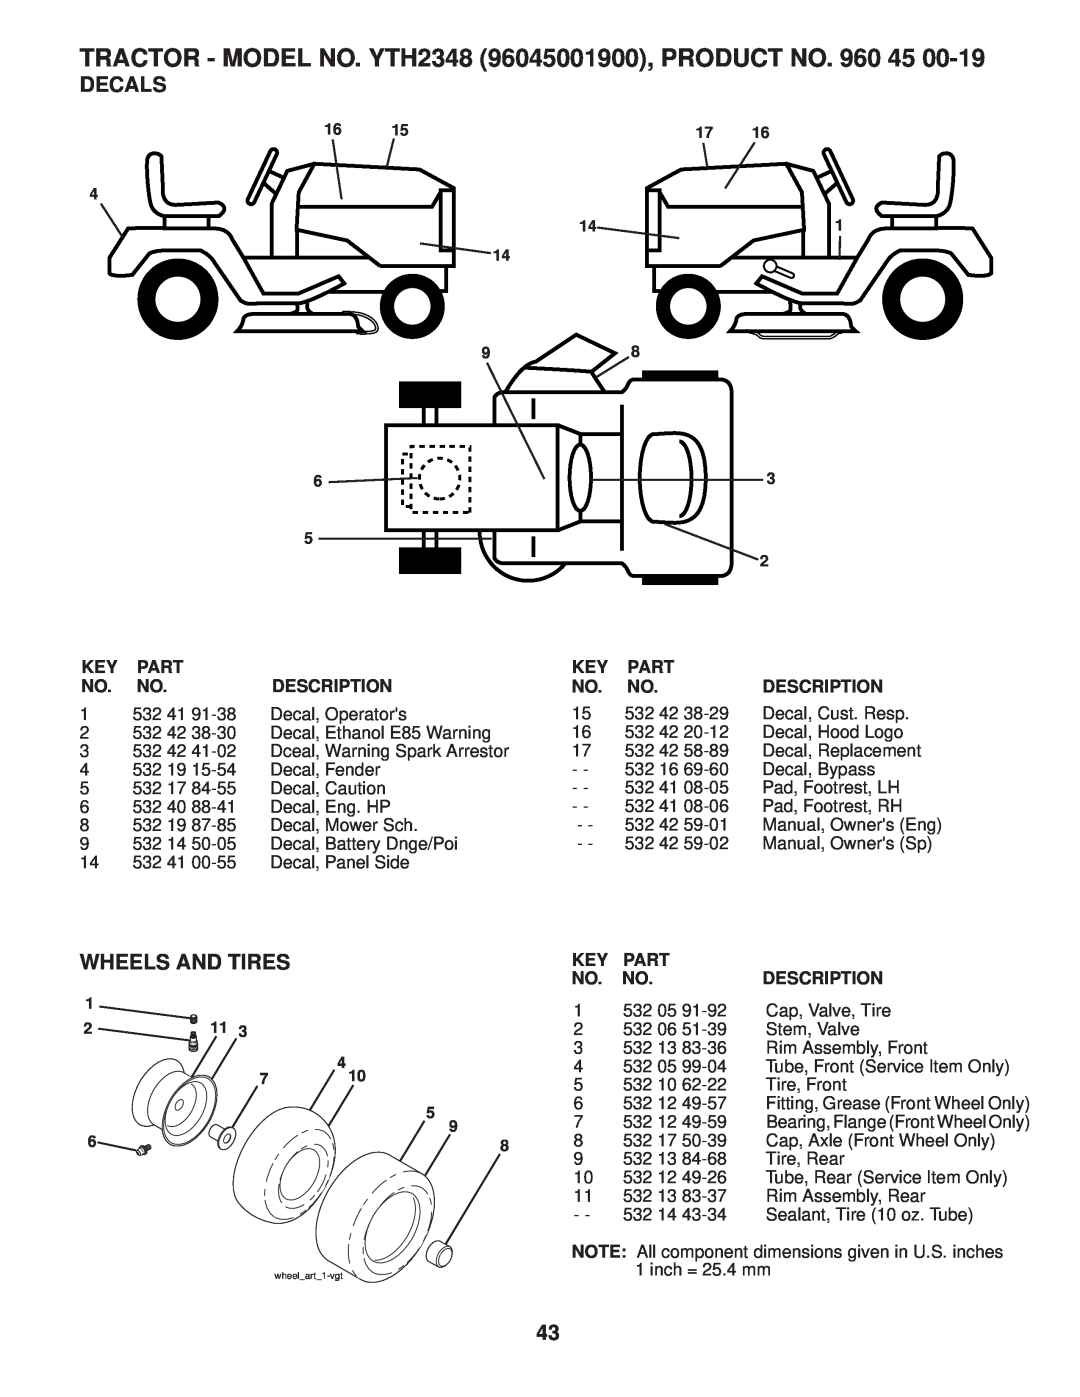 Husqvarna owner manual Decals, Wheels And Tires, TRACTOR - MODEL NO. YTH2348 96045001900, PRODUCT NO 